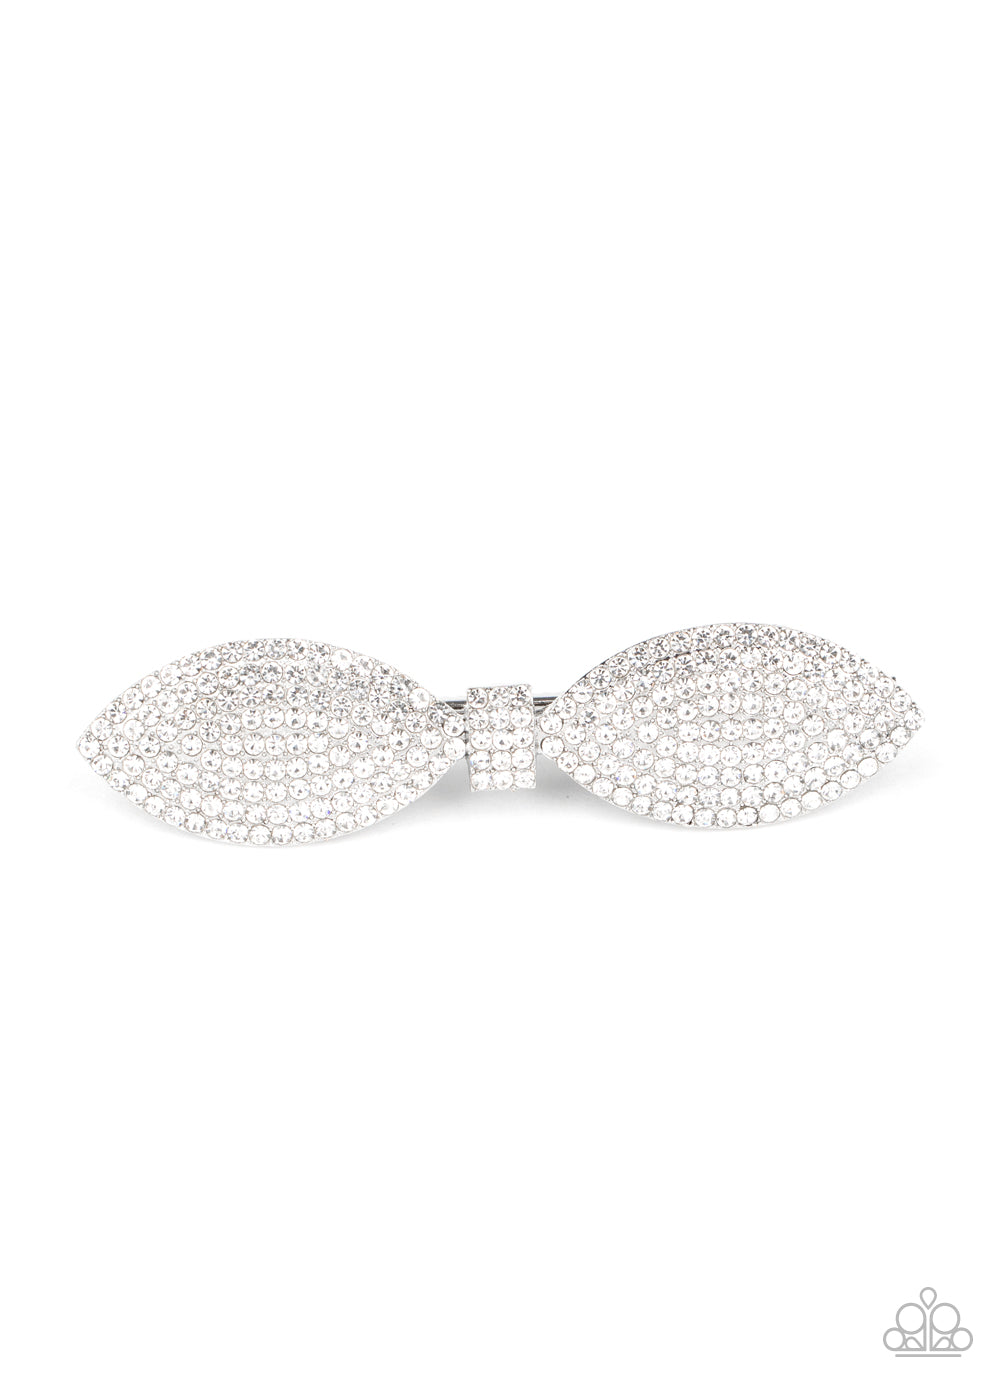 &lt;P&gt;A silver bow is encrusted in row after row of glassy white rhinestones, creating a sparkling centerpiece. Features a standard hair clip on the back.&lt;/P&gt;

&lt;P&gt;&lt;I&gt;Sold as one individual hair clip.&lt;/I&gt;&lt;/P&gt;


&lt;img src=\&quot;https://d9b54x484lq62.cloudfront.net/paparazzi/shopping/images/517_tag150x115_1.png\&quot; alt=\&quot;New Kit\&quot; align=\&quot;middle\&quot; height=\&quot;50\&quot; width=\&quot;50\&quot;/&gt;